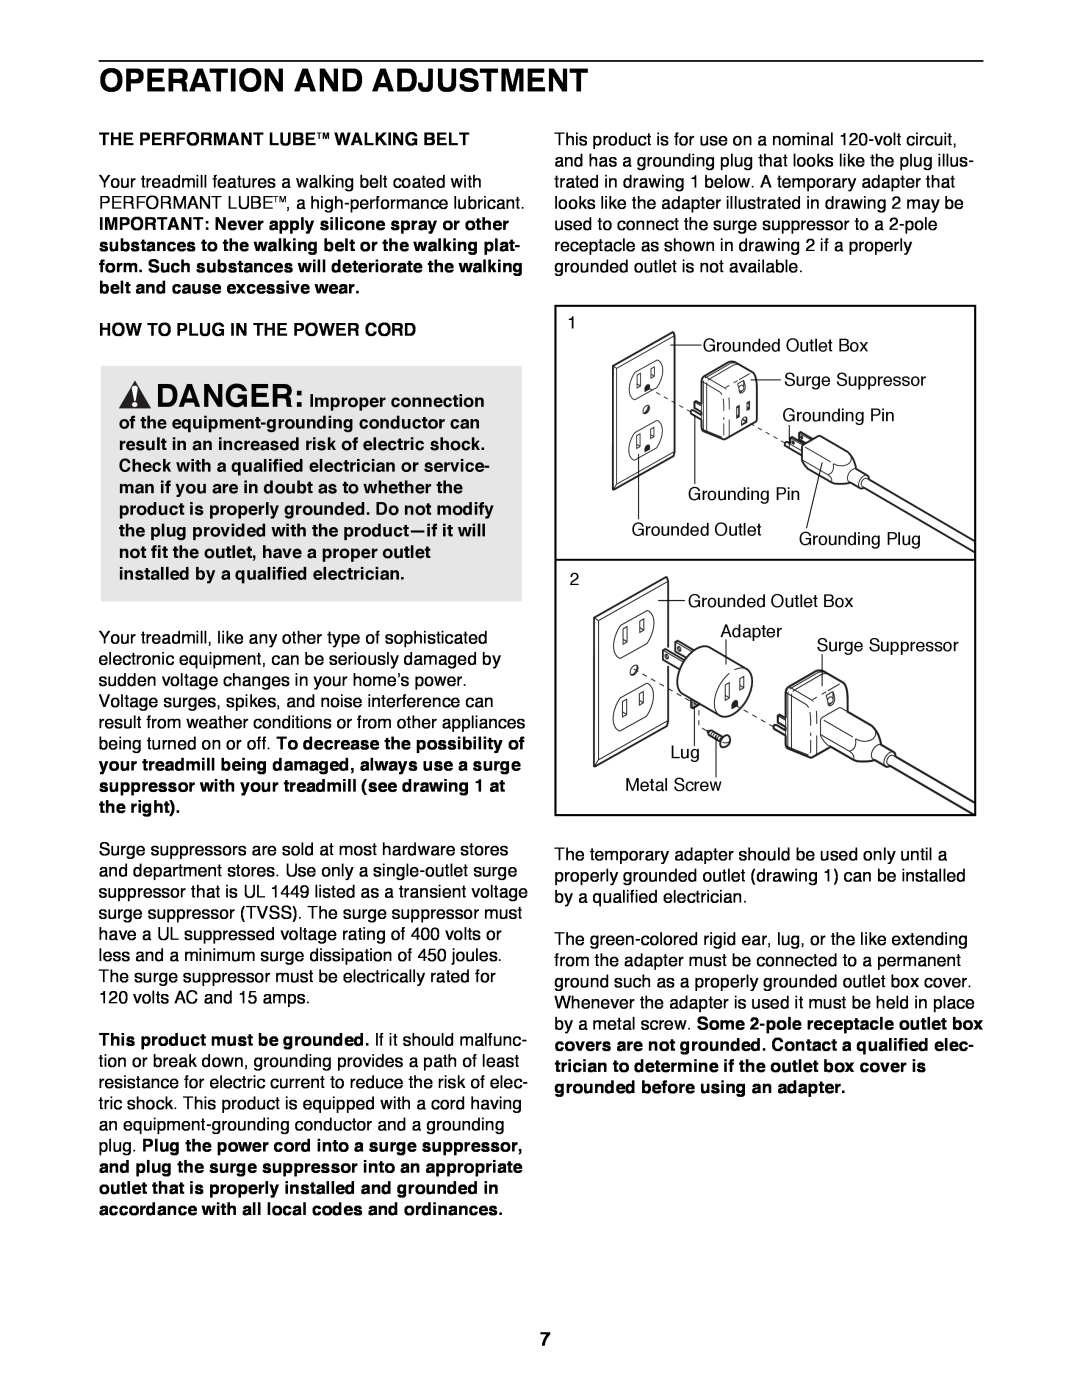 Image 831.297572 user manual Operation And Adjustment, The Performant Lubetm Walking Belt, How To Plug In The Power Cord 